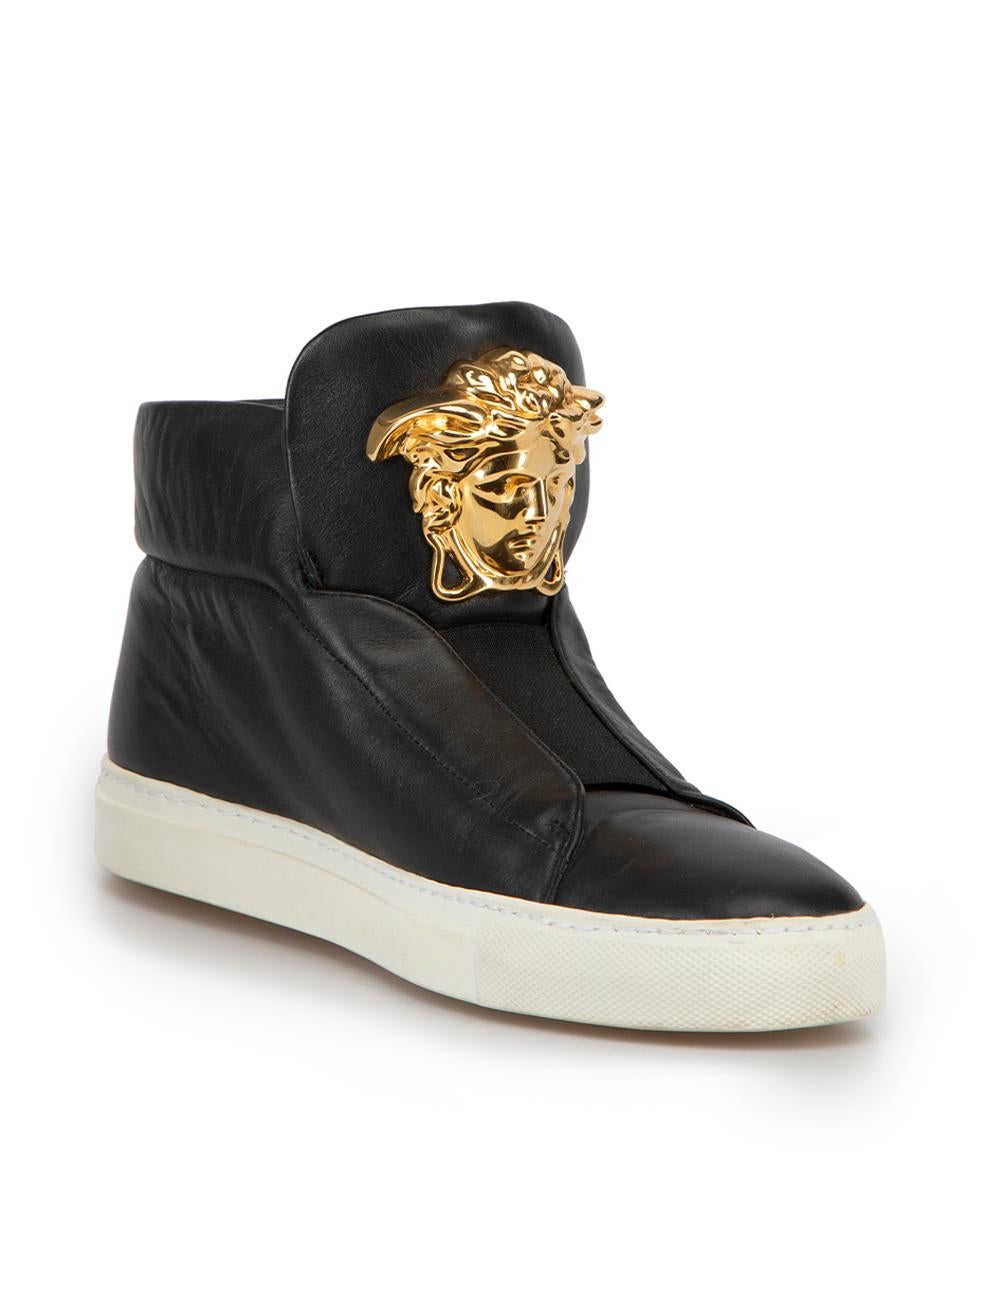 CONDITION is Very good. Hardly any visible wear to trainers is evident on this used Versace designer resale item. 
 
 Details
  Black
 Leather
 High top trainers
 Round toe
 Flatform white rubber heel
 Elasticated strap
 Gold tone medusa head